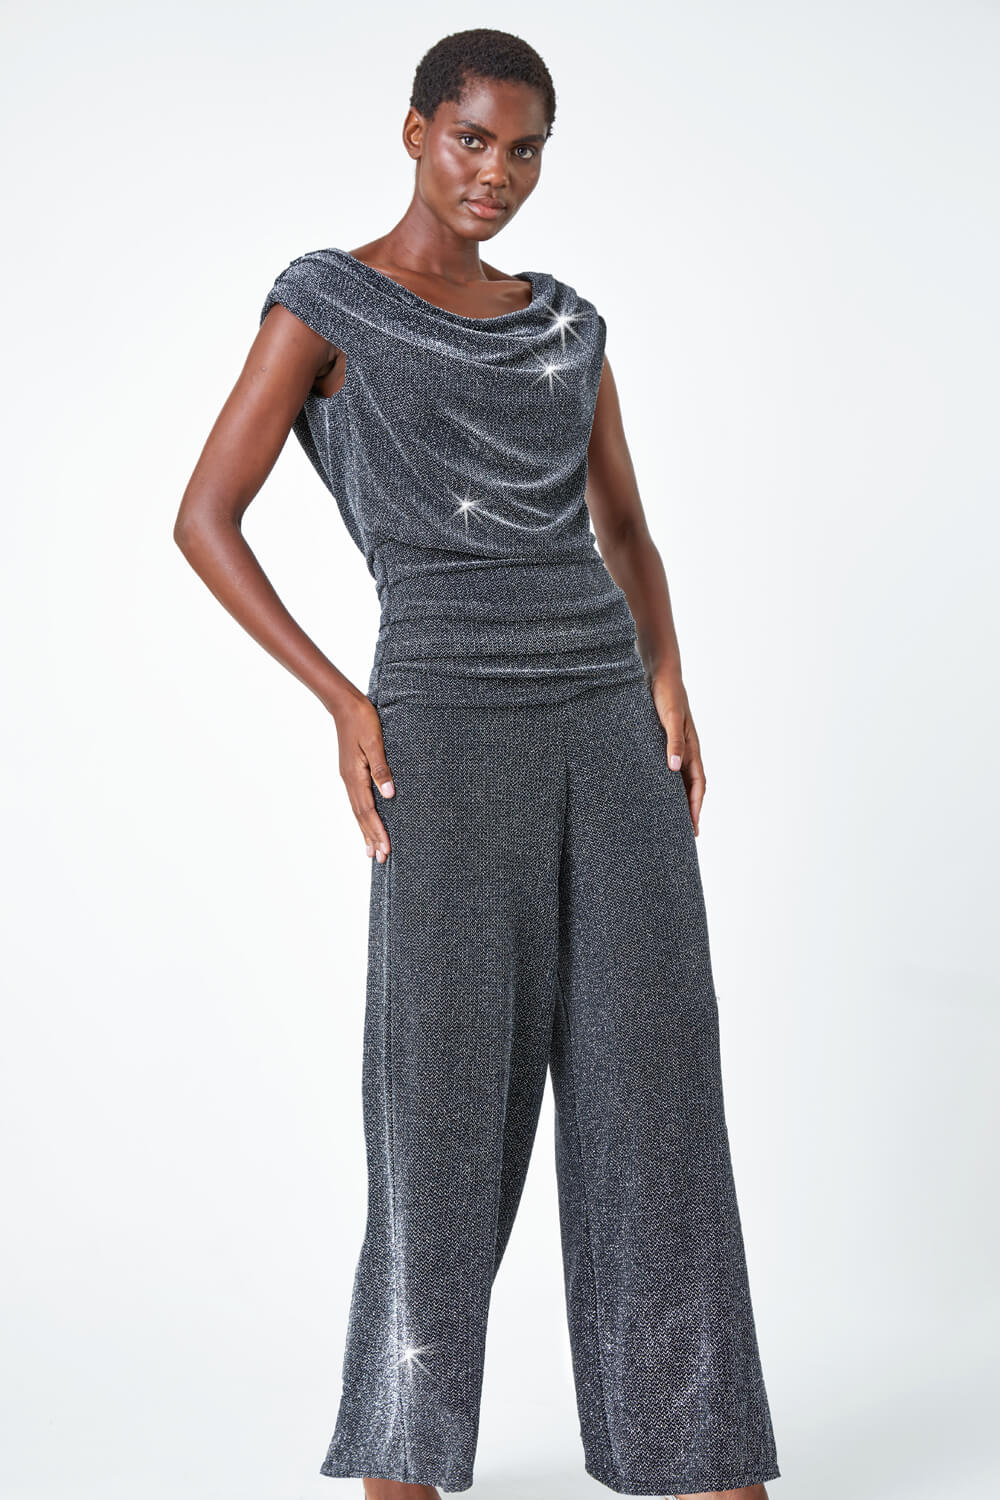 Silver Glitter Cowl Neck Ruched Stretch Jumpsuit | Roman UK